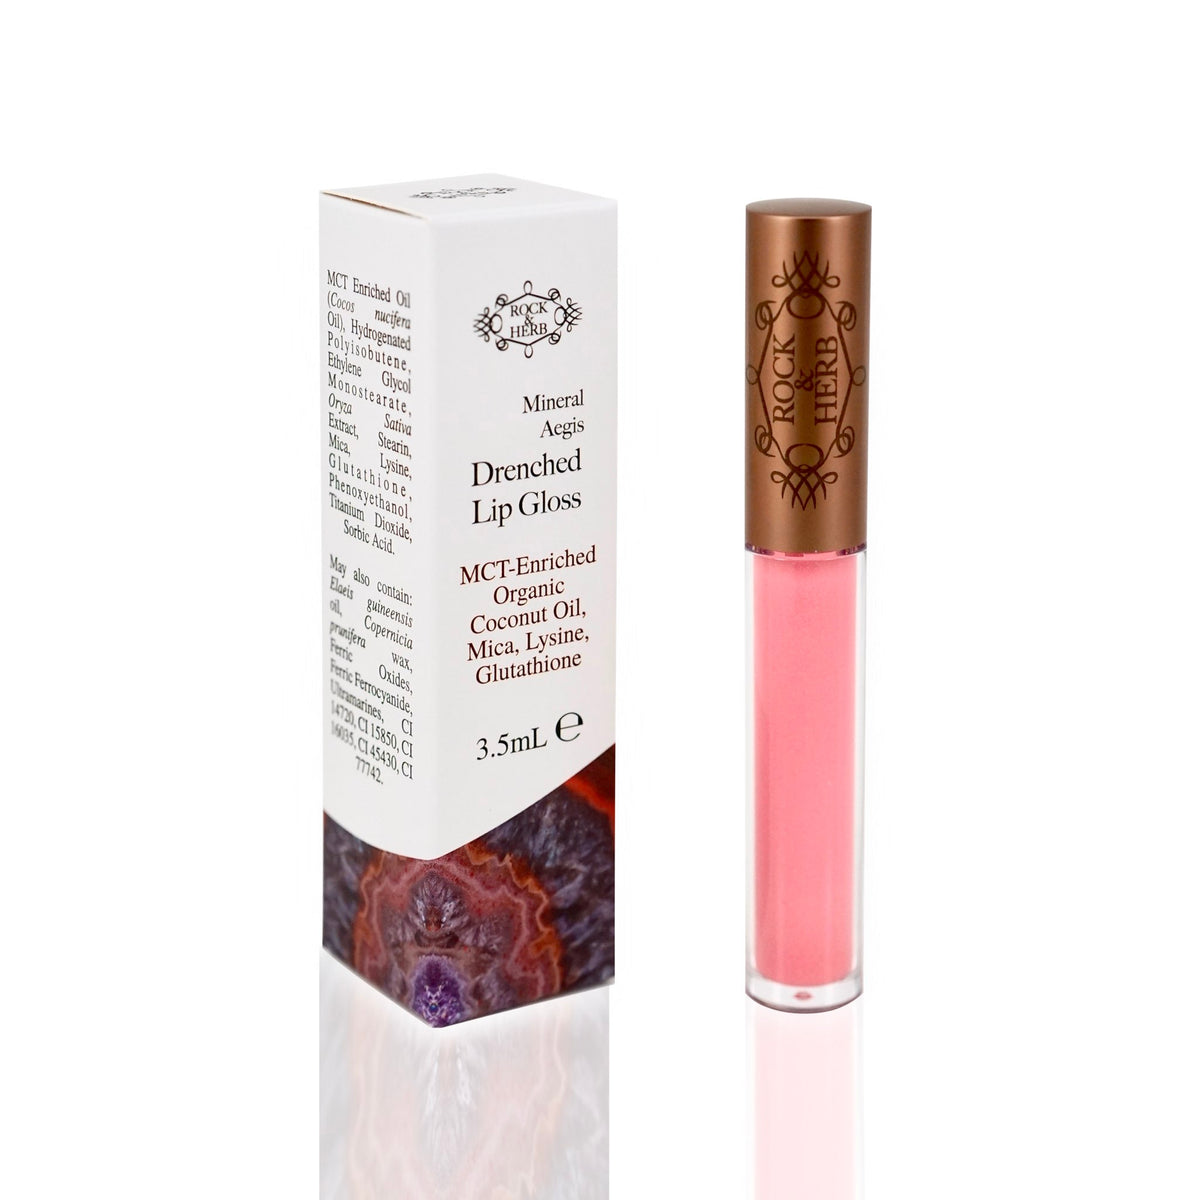 Mineral Aegis Drenched Lip Gloss